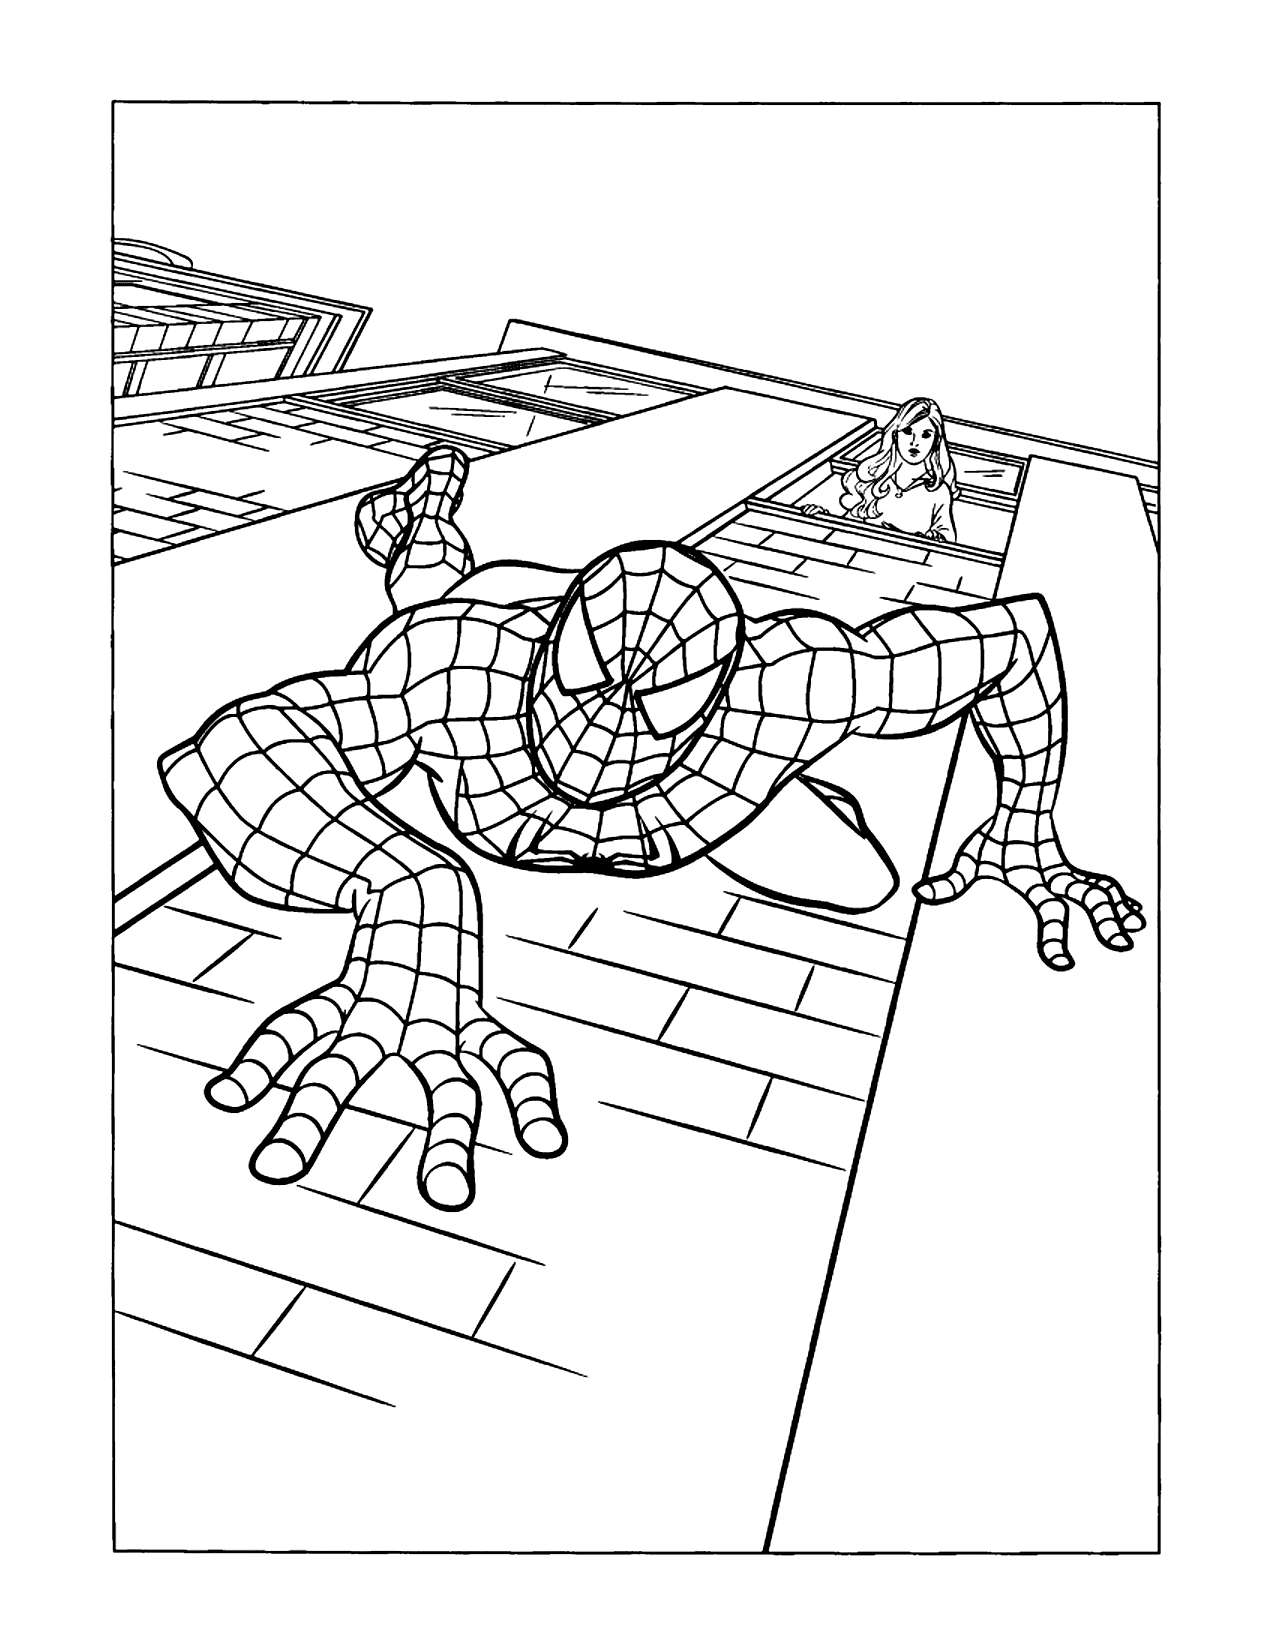 Spiderman Climbing Down A Building Coloring Page